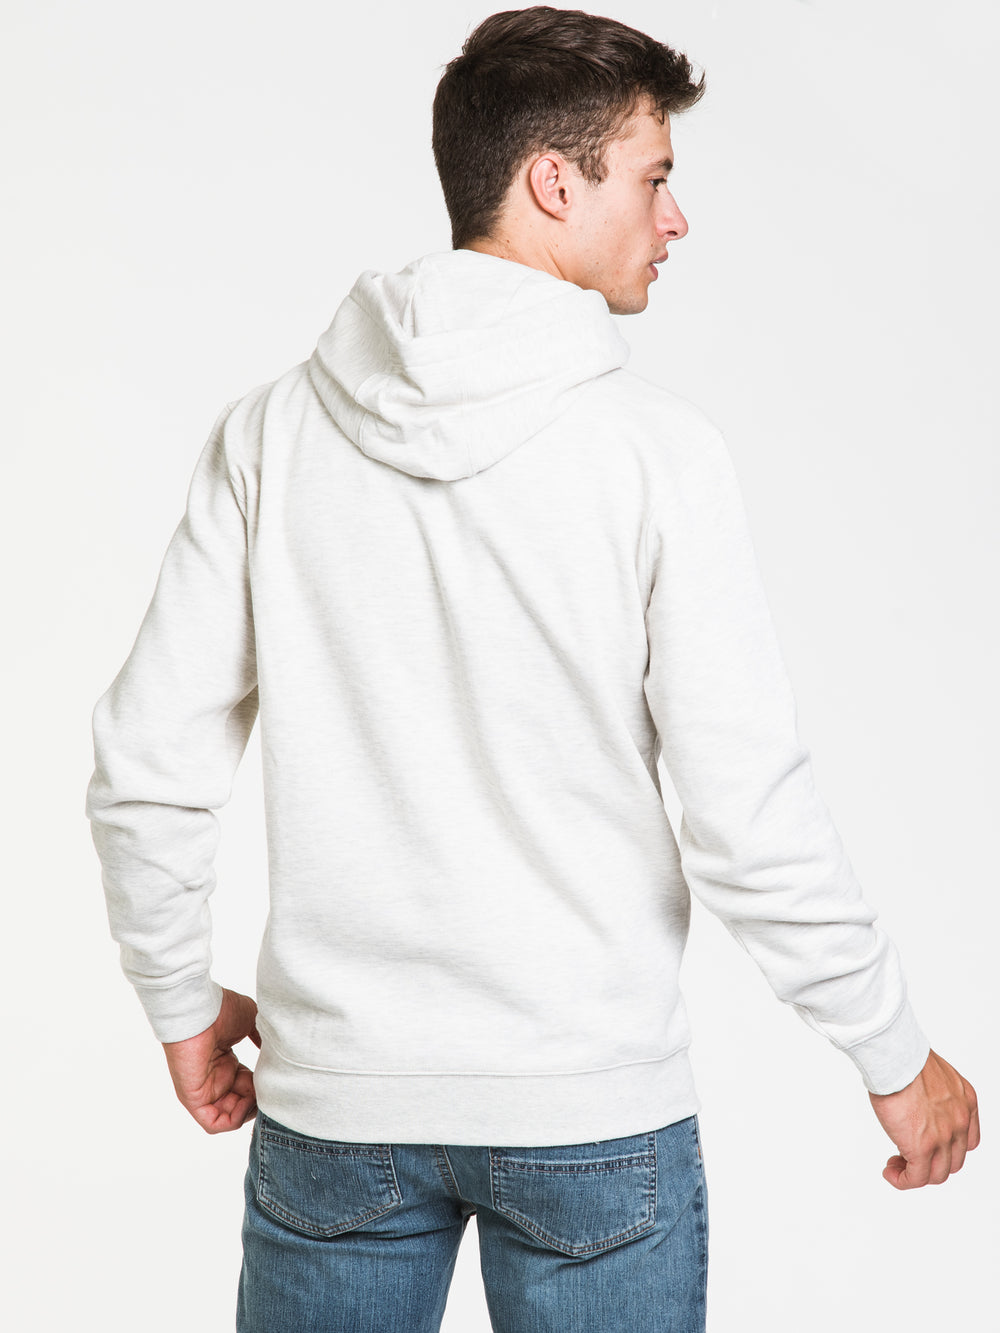 VANS 66 CHAMPS PULLOVER HOODIE - CLEARANCE